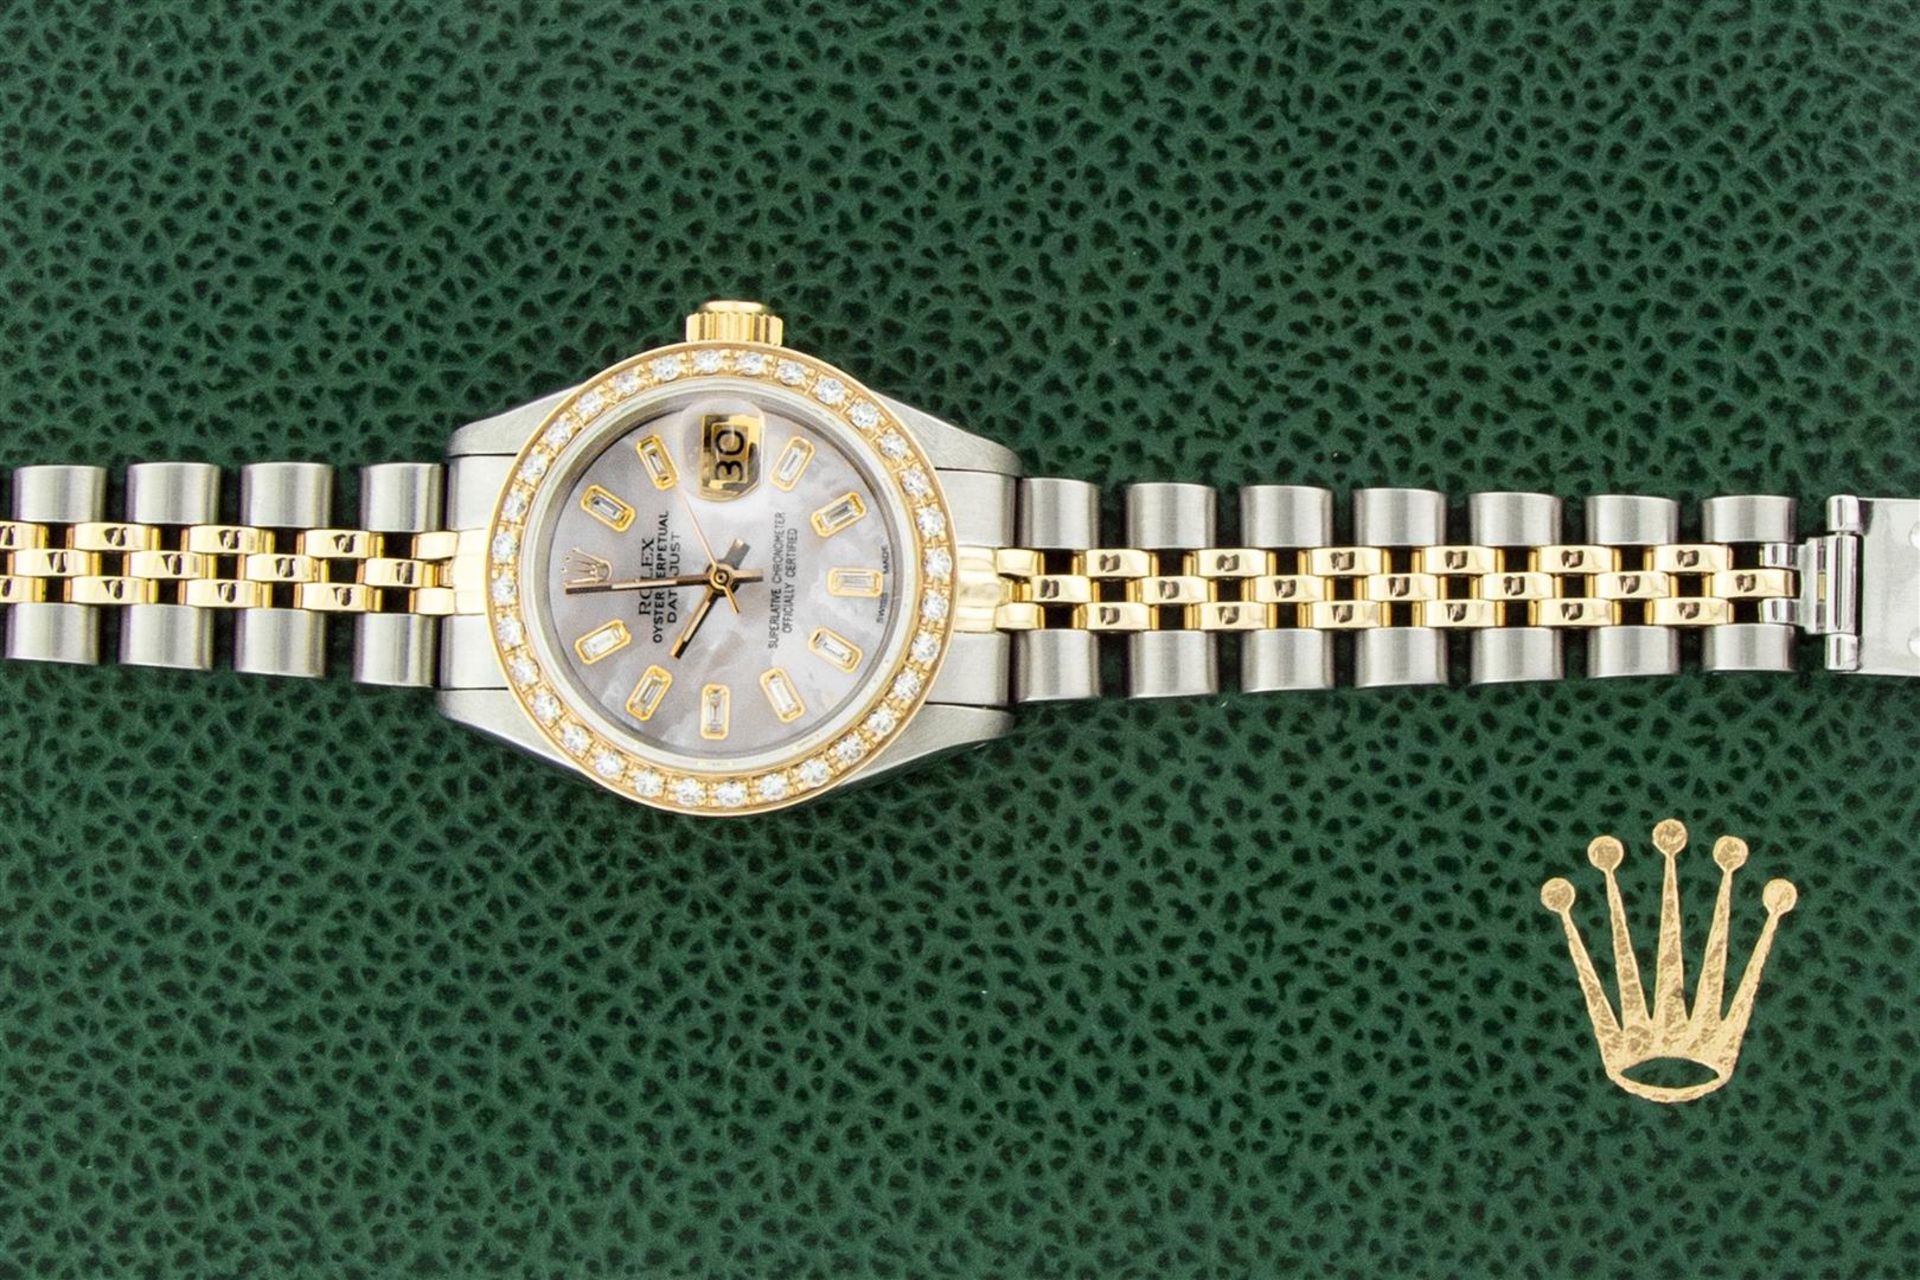 Ladies Datejust 26 YG/SS MOP Baguette Diamond Dial Oyster Perpetual - Image 3 of 8